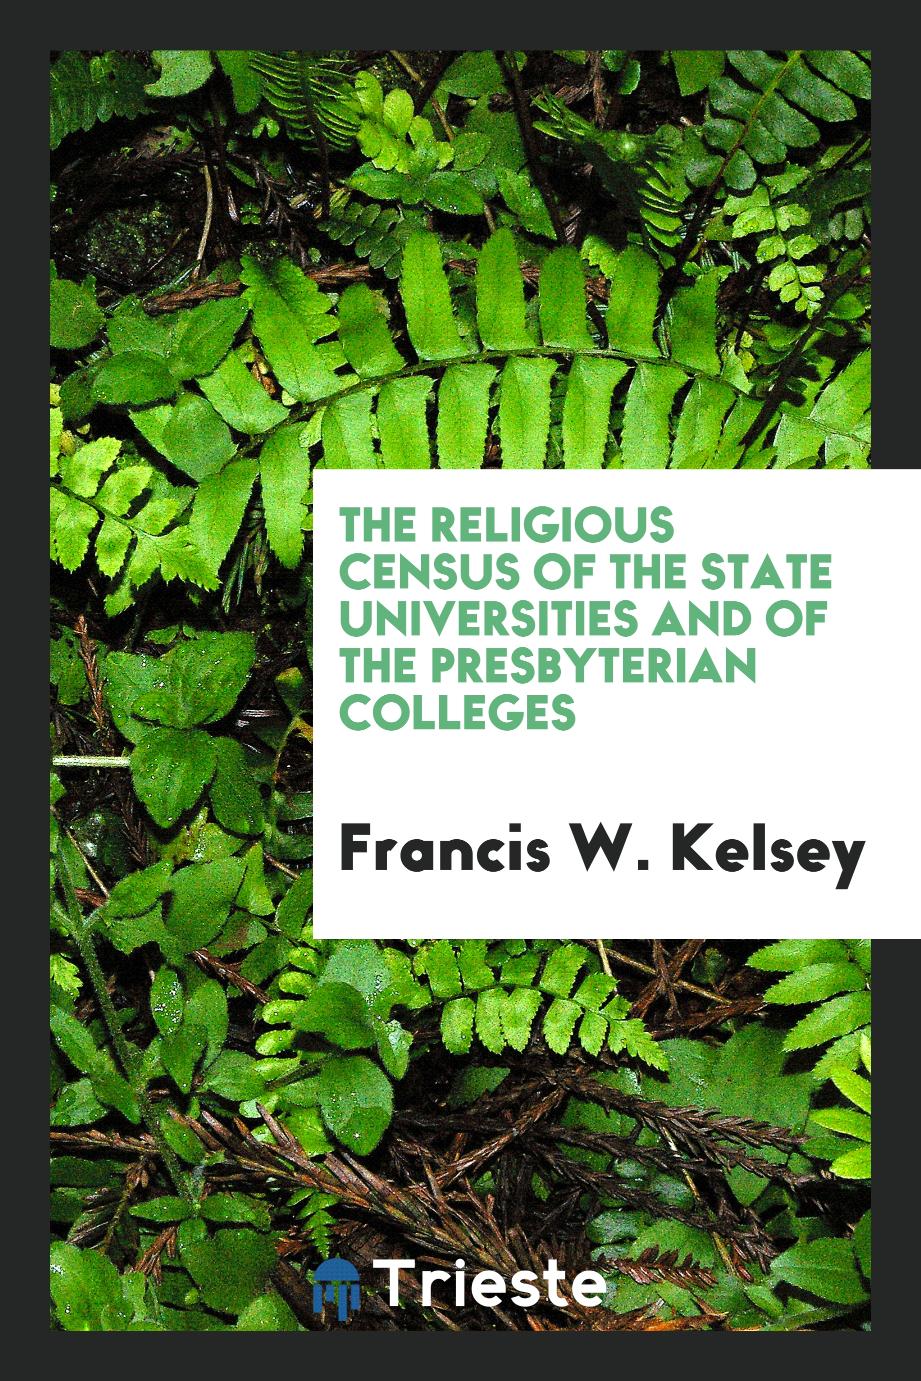 The Religious Census of the State Universities and of the Presbyterian Colleges